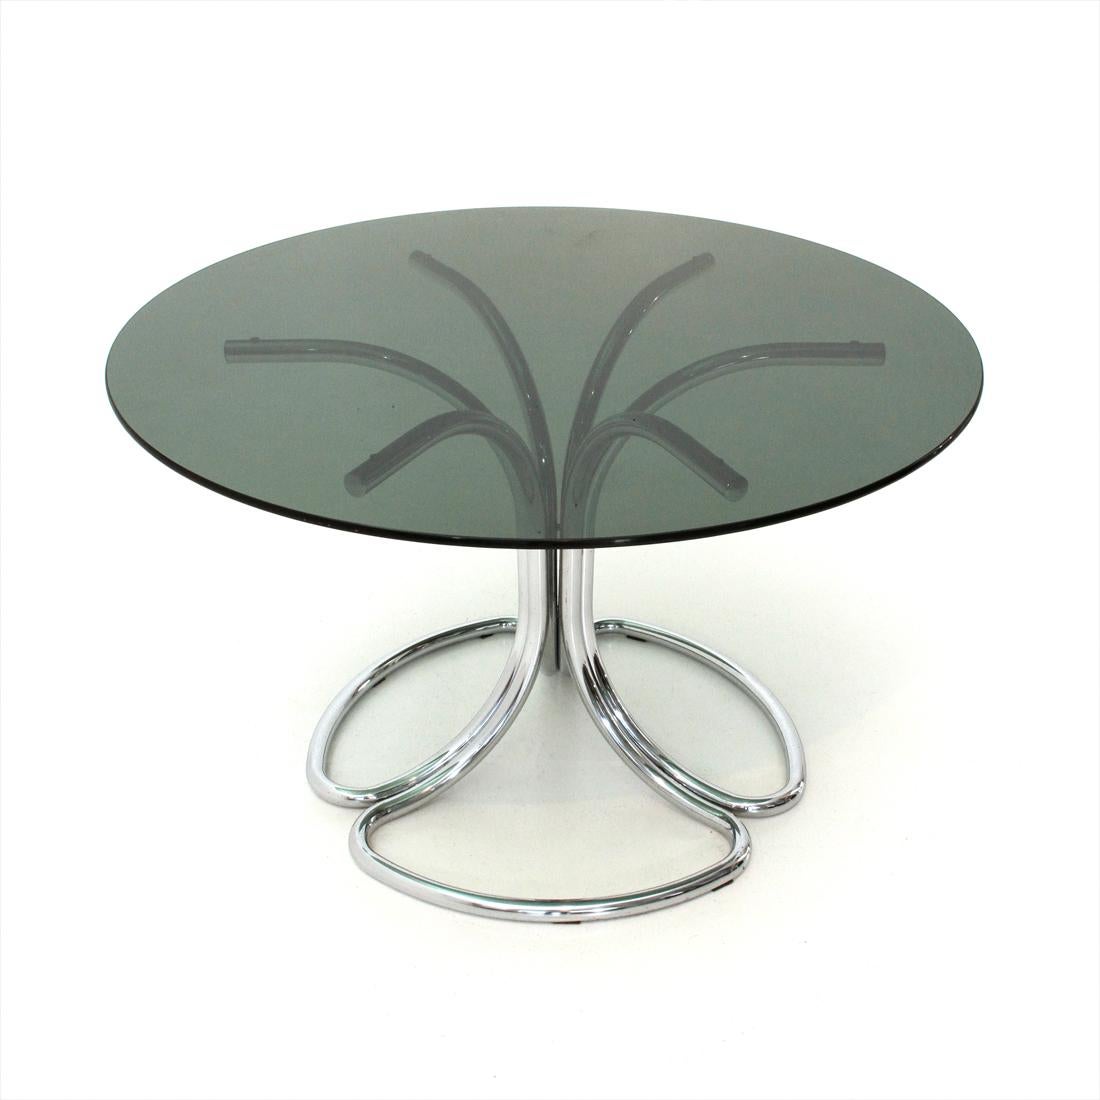 Italian manufacturing table produced in the 1970s.
Chromed metal tubular structure.
Smoked glass top in circular shape.
Good general conditions, some spots of rust and some signs on the glass due to normal use over time.

Dimensions: Diameter